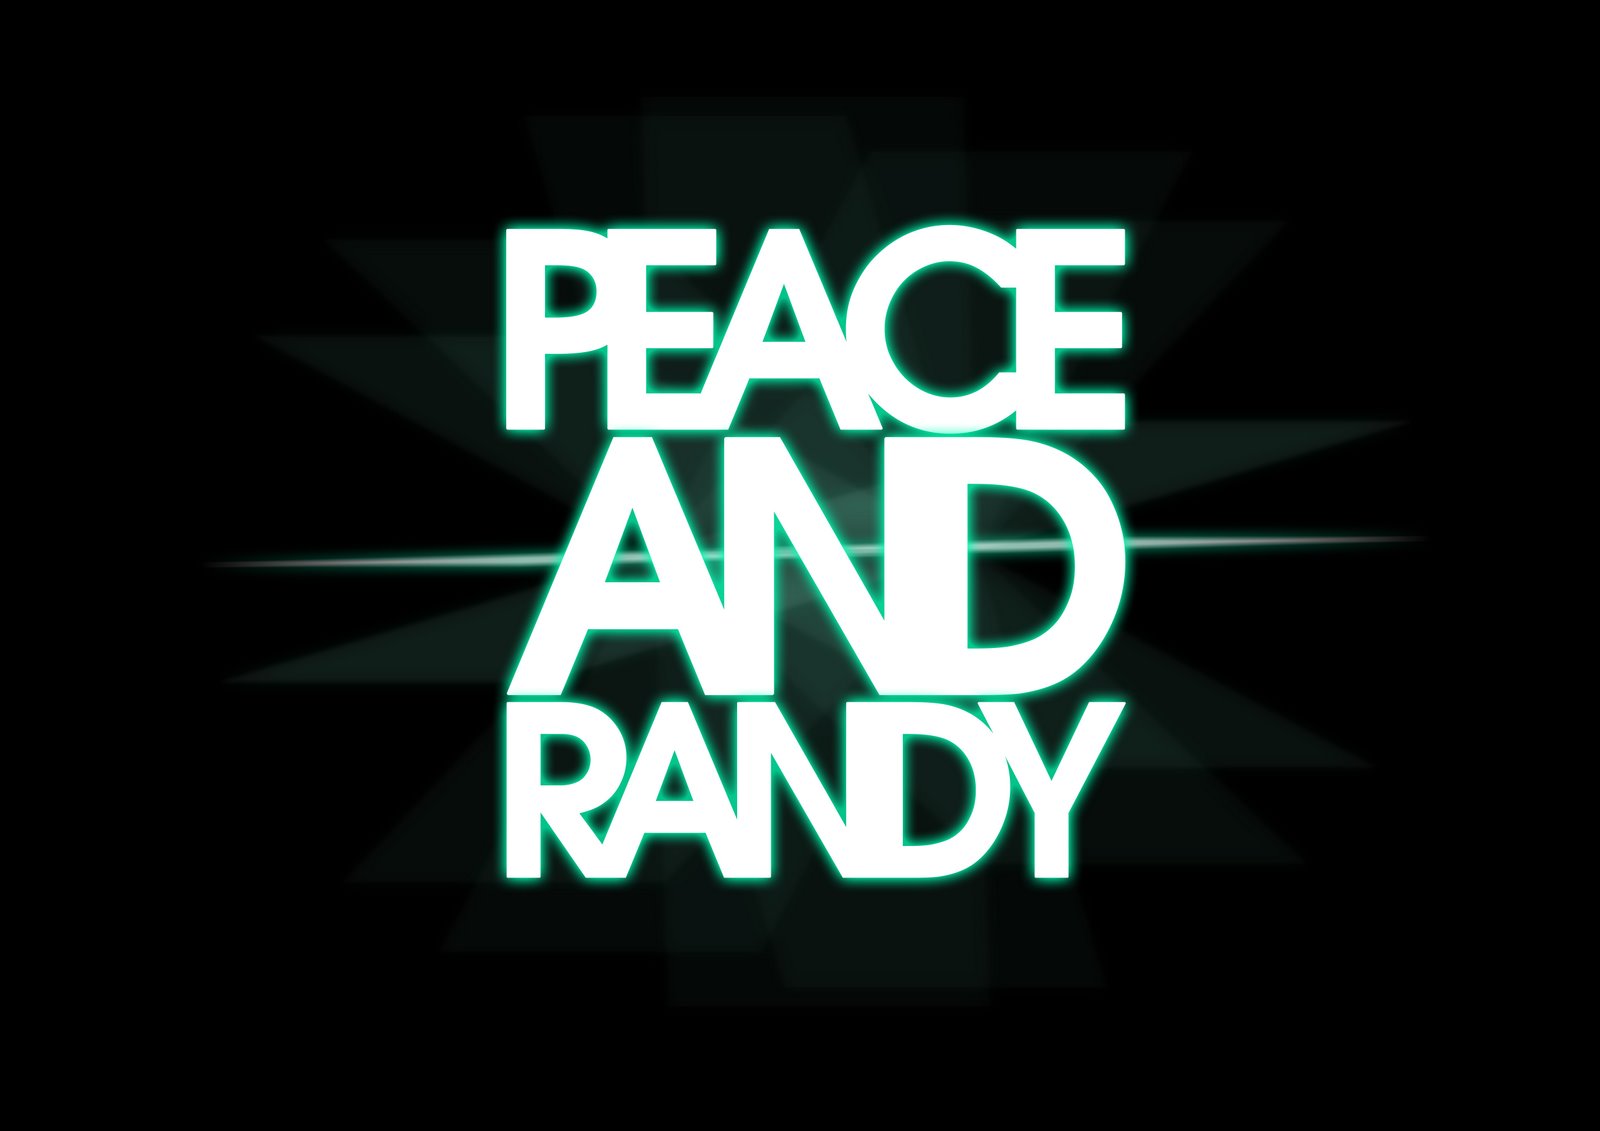 Peace and Randy